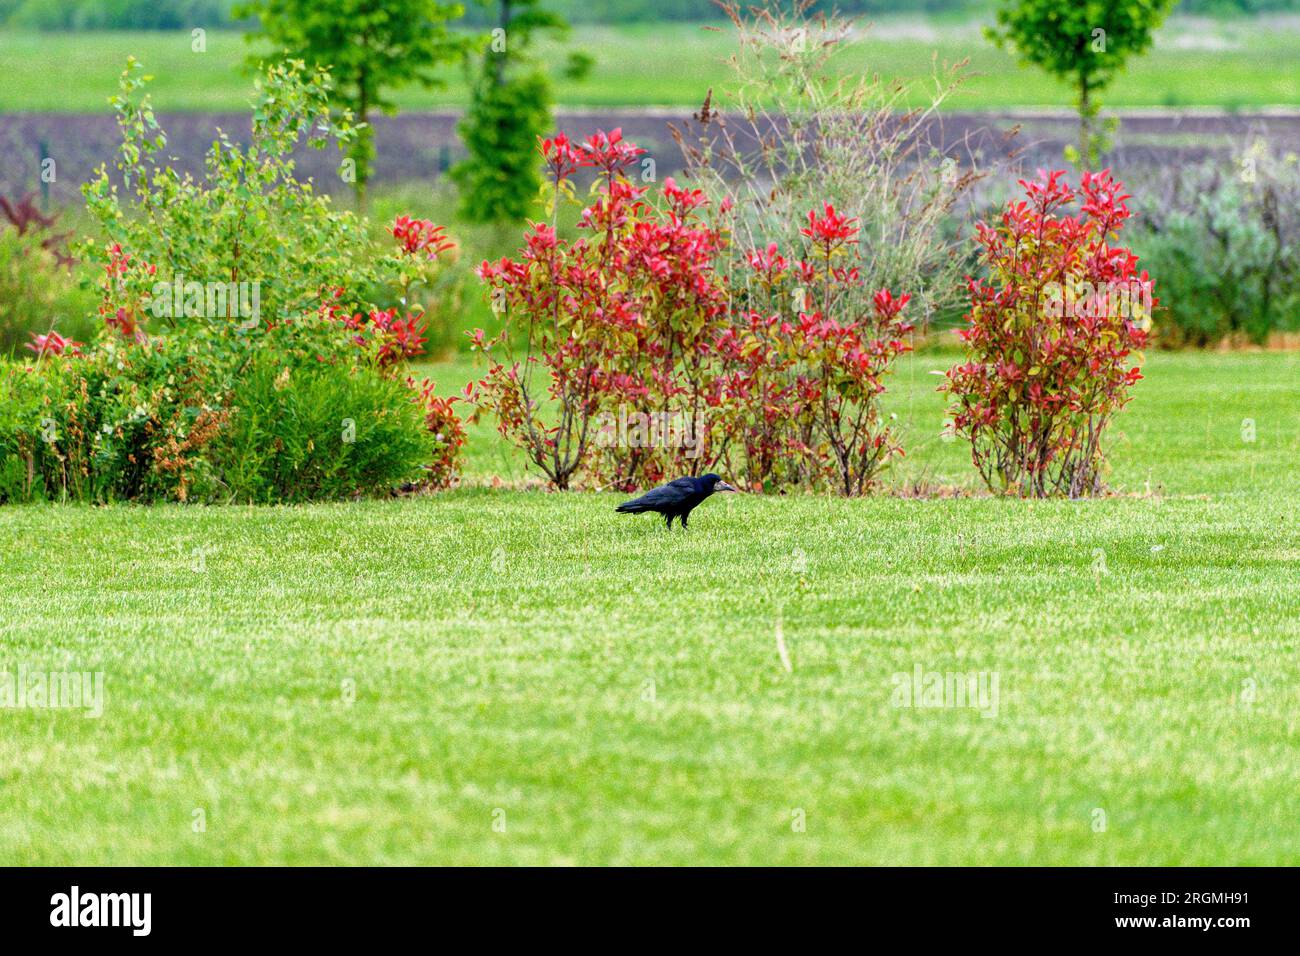 Same carrion crows (Corvus corone) on green grass after raining. Stock Photo